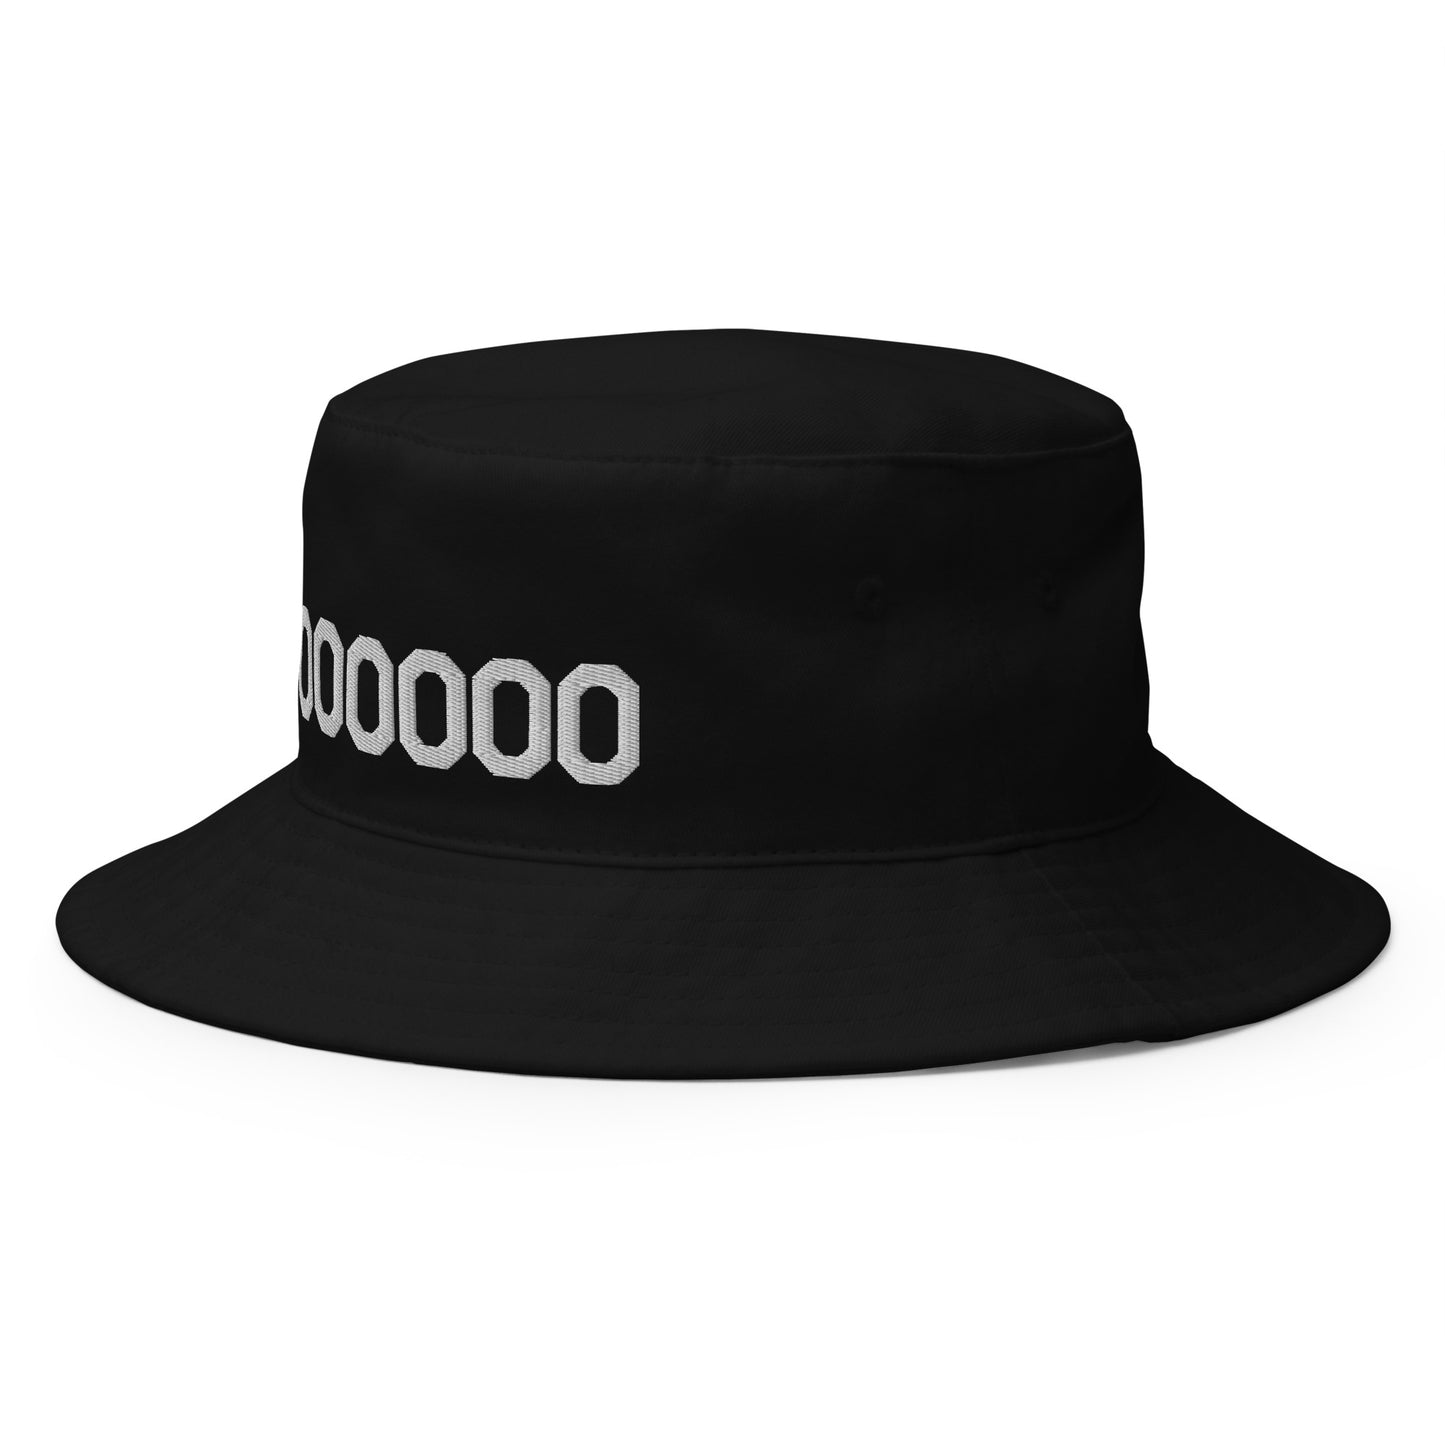 #000000 Embroidered Bucket Hat